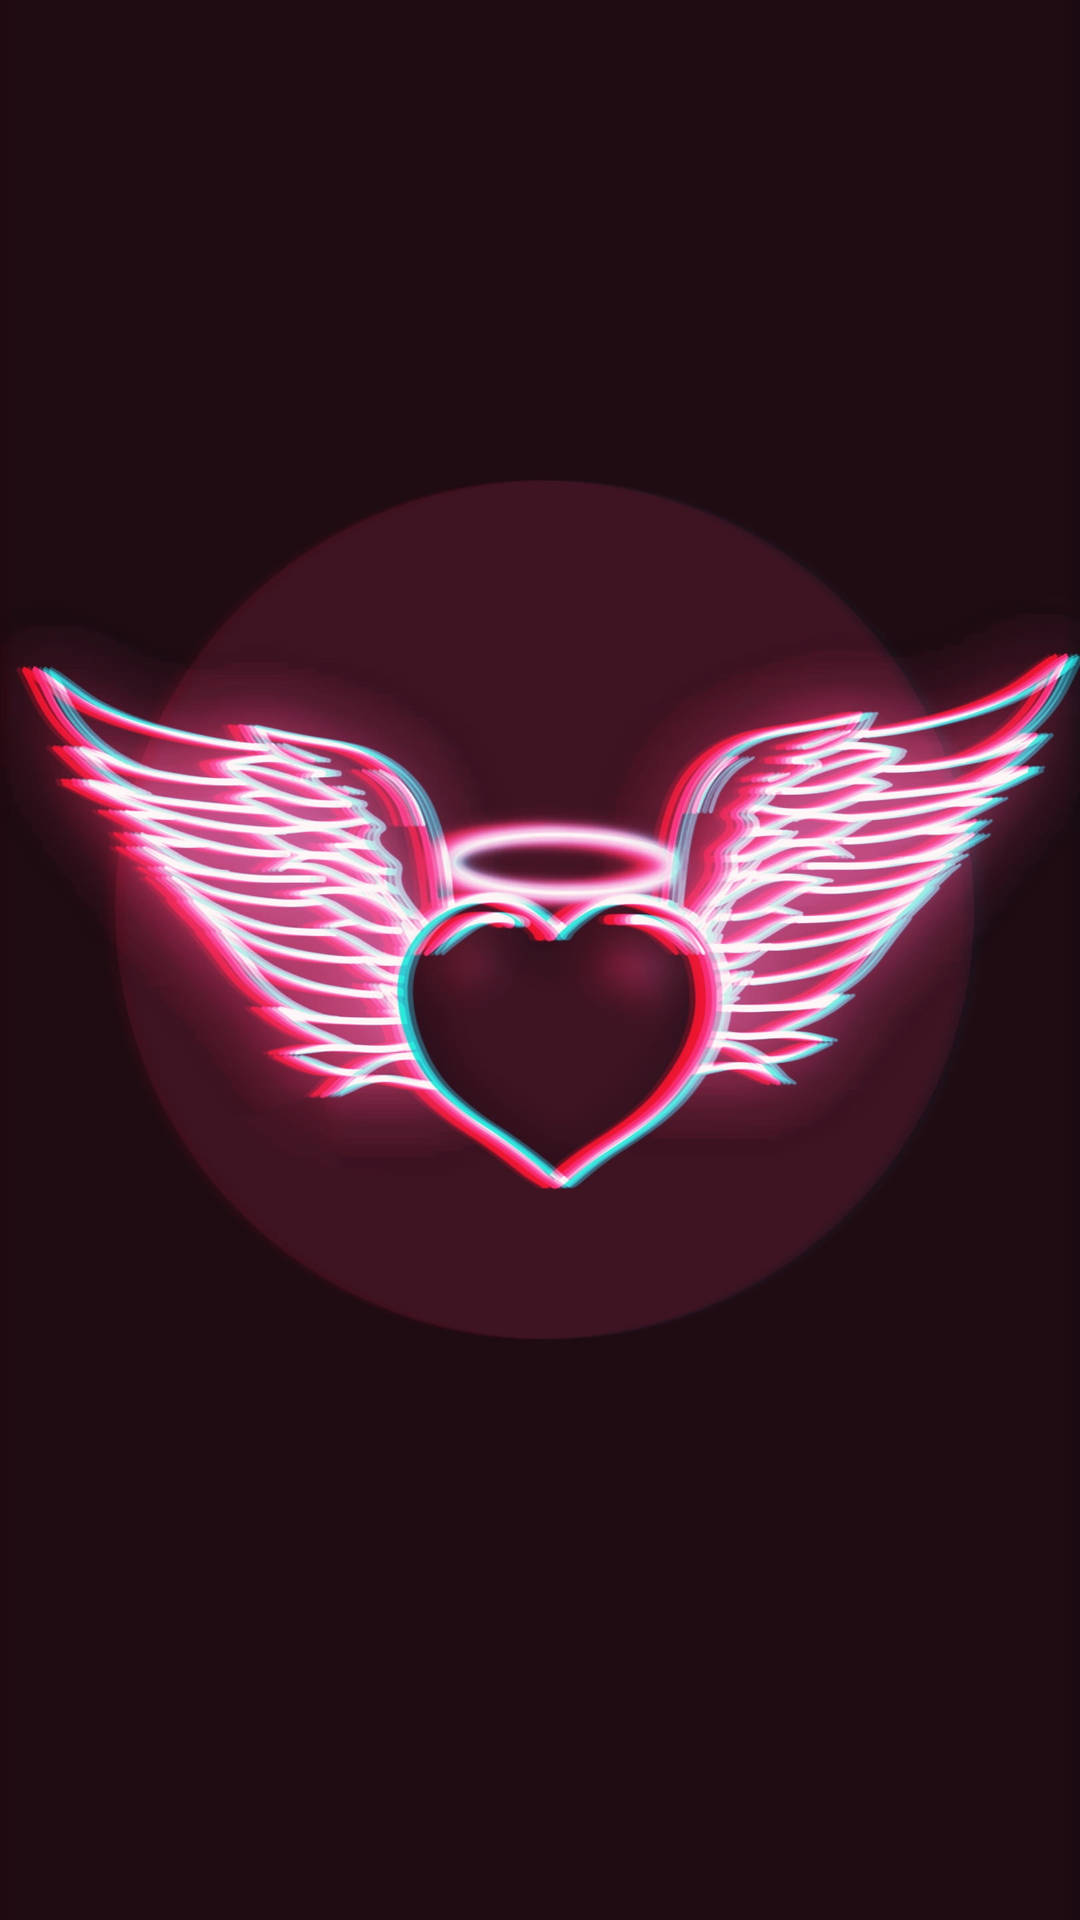 Heart With Wings Neon Aesthetic Iphone Background